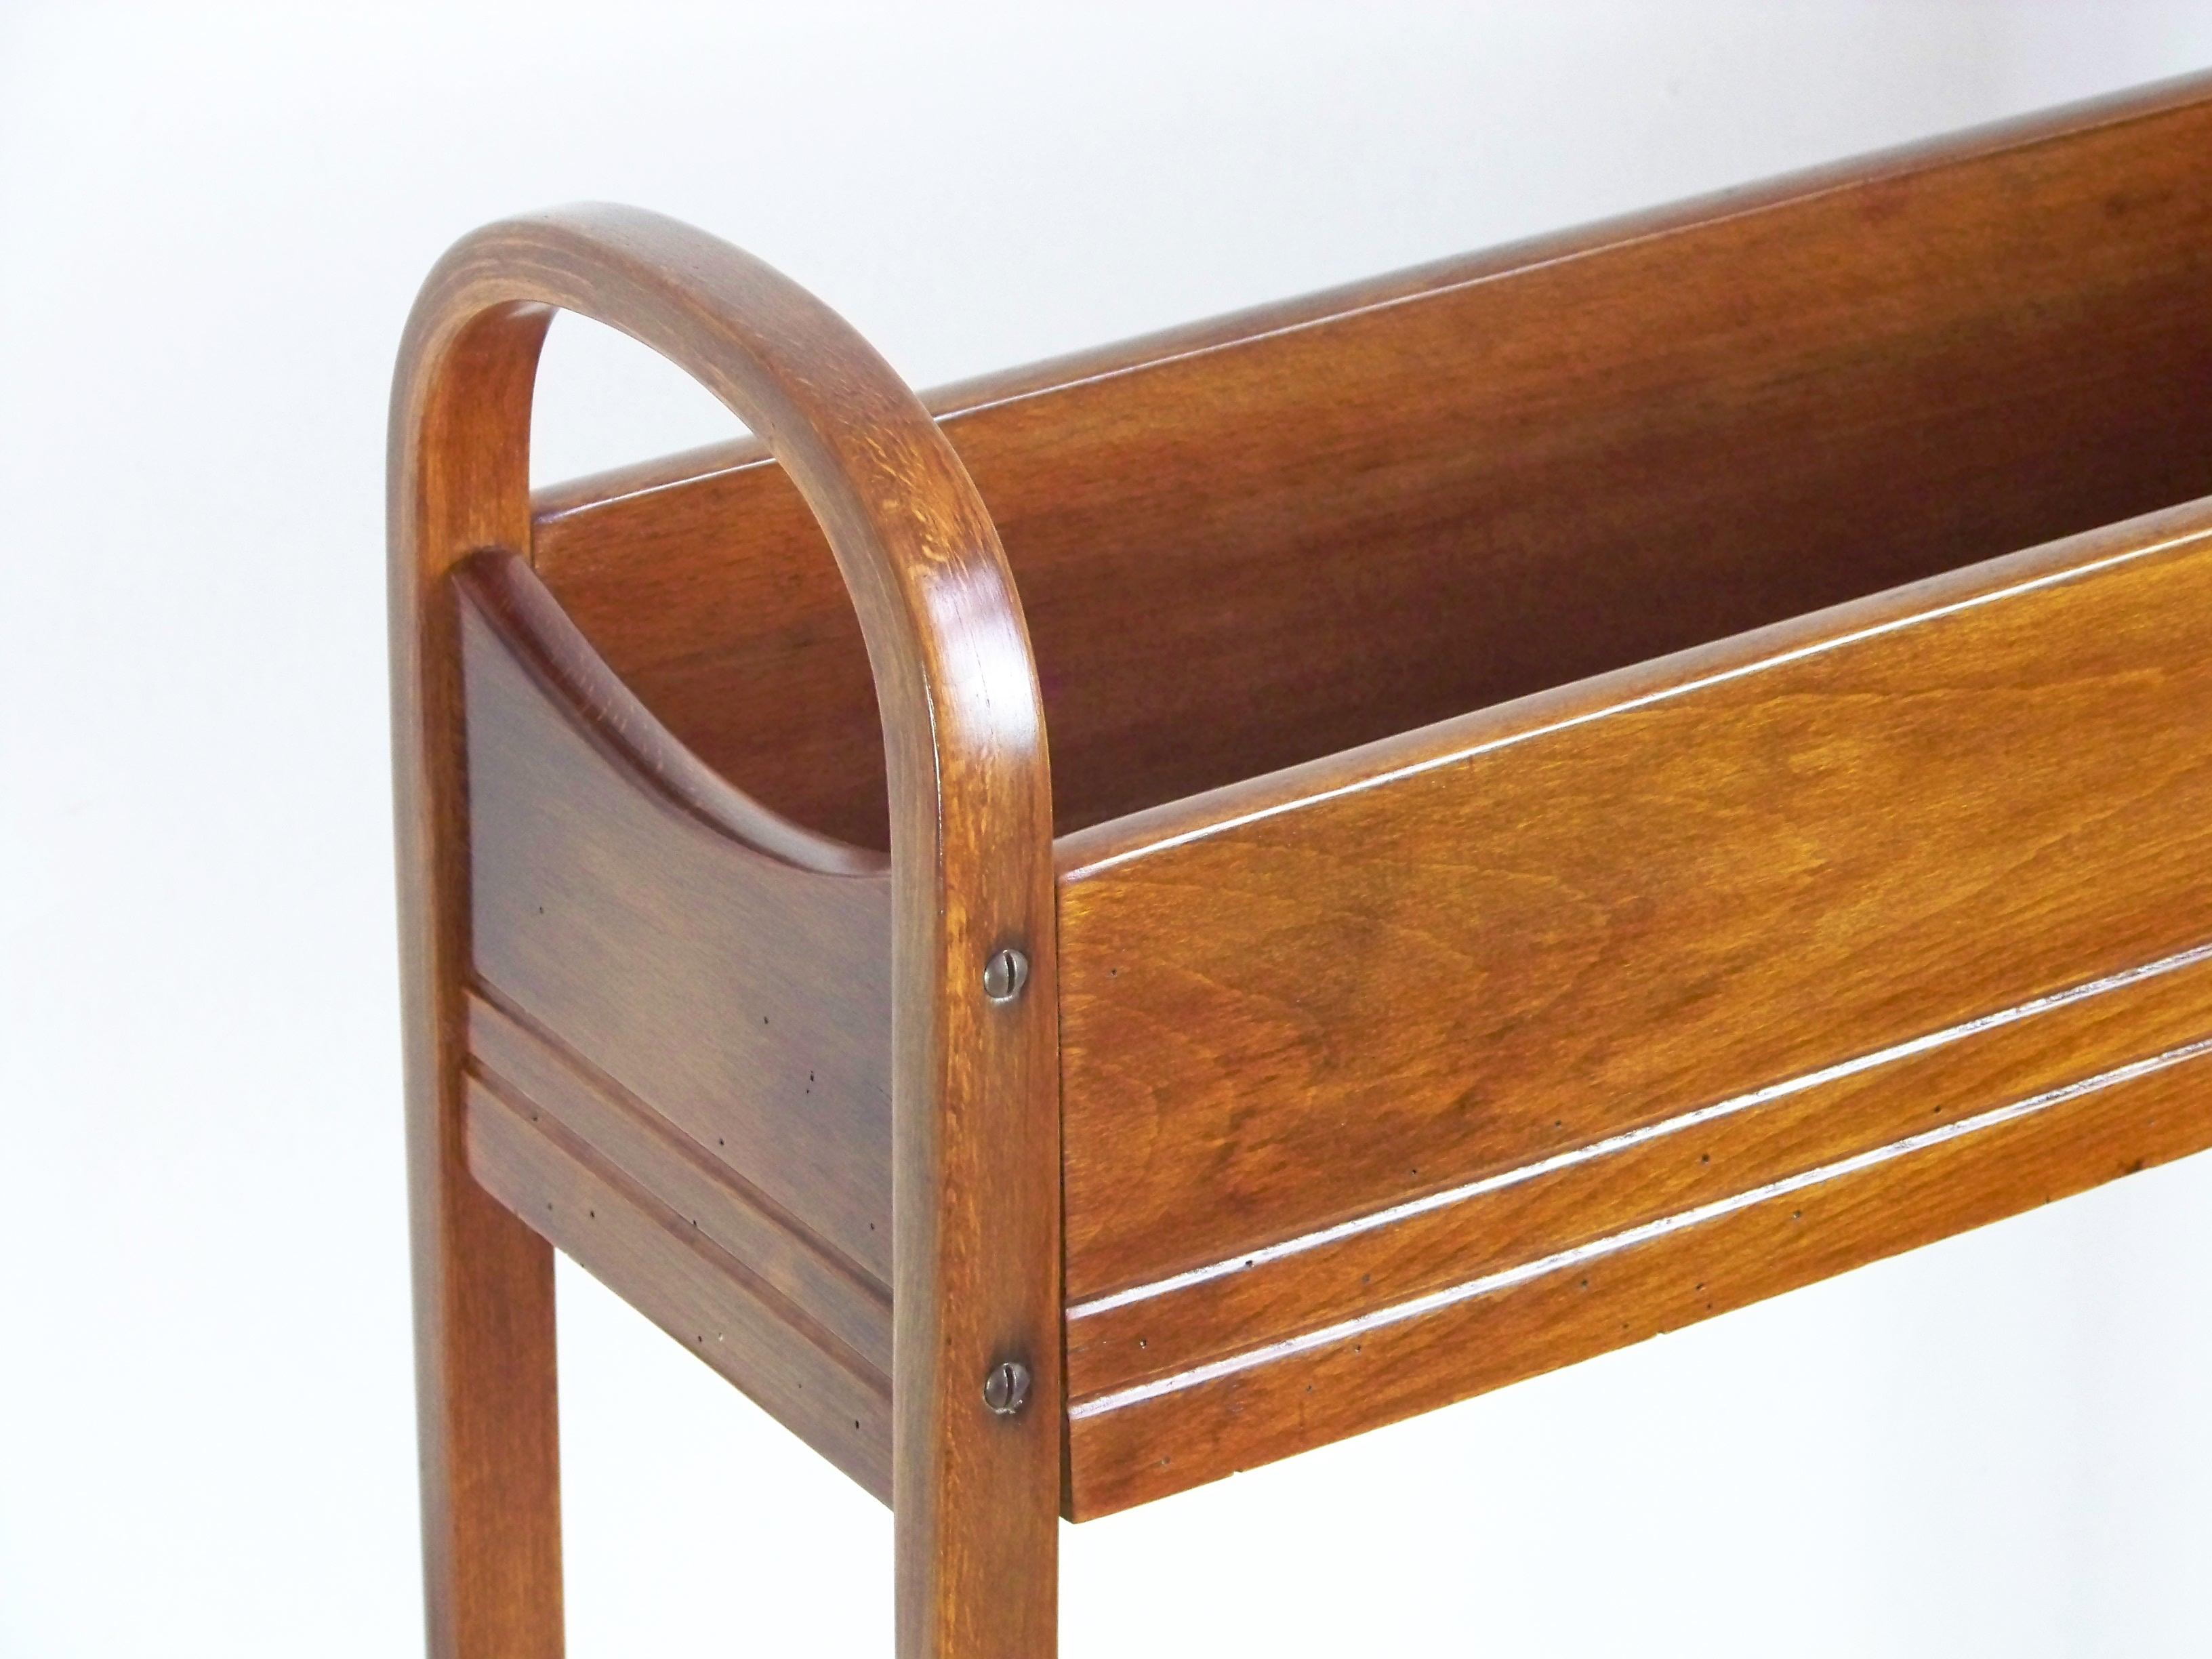 Manufactured in Austria by the Gebrüder Thonet company. Newly restored.